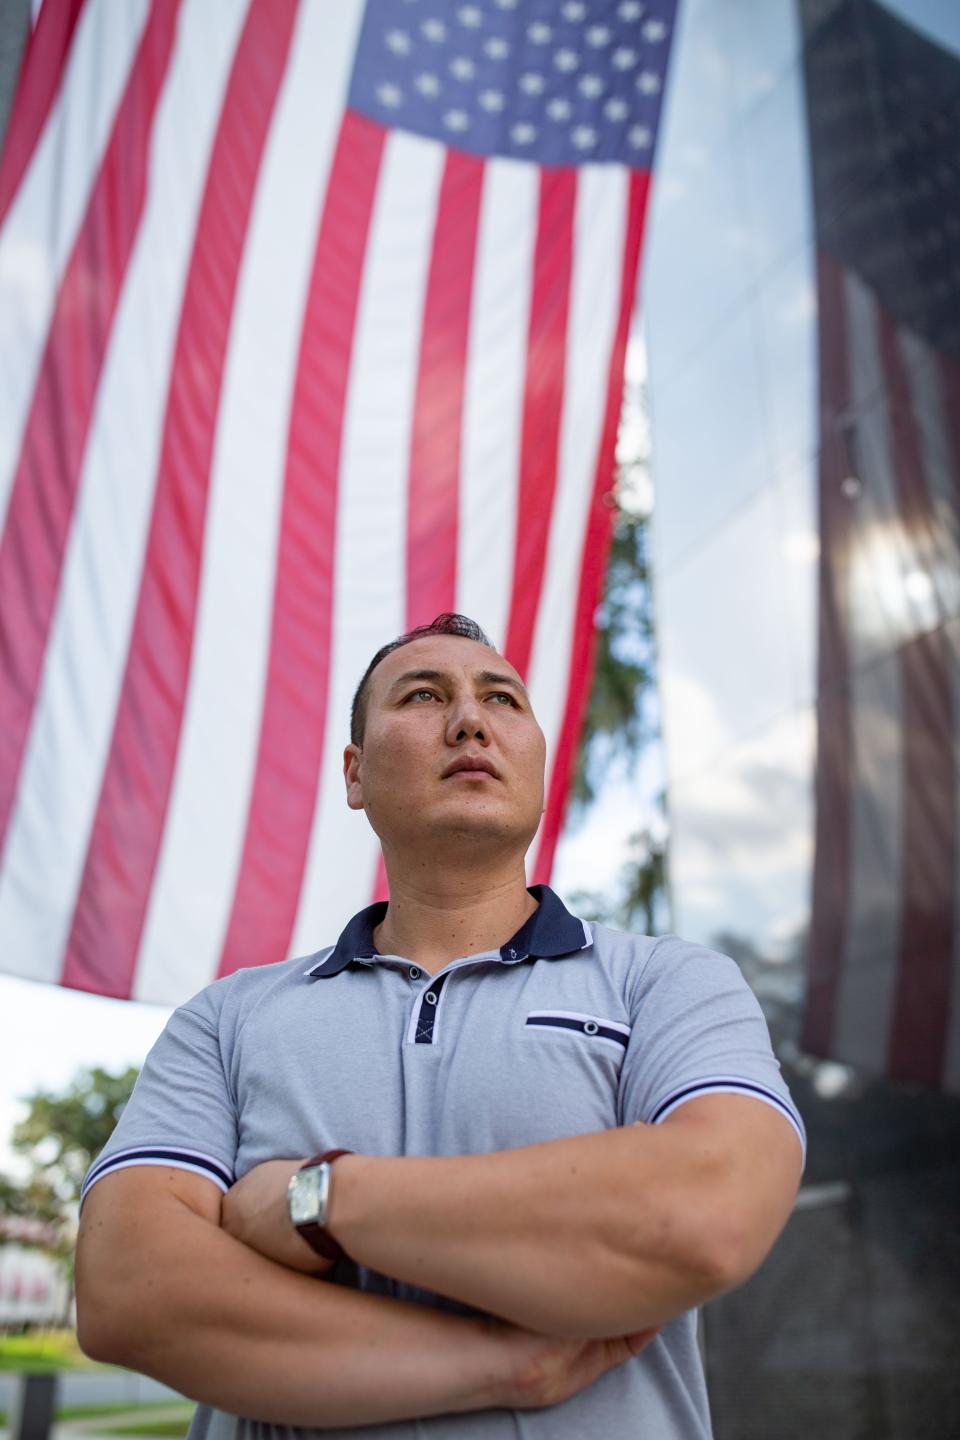 Dawood Sadiqi served as a translator for the United States military for eight years in Afghanistan. He and his family now live in Tallahassee, Florida. Two years since immigrating to the US, he and his family have yet to receive their green cards.